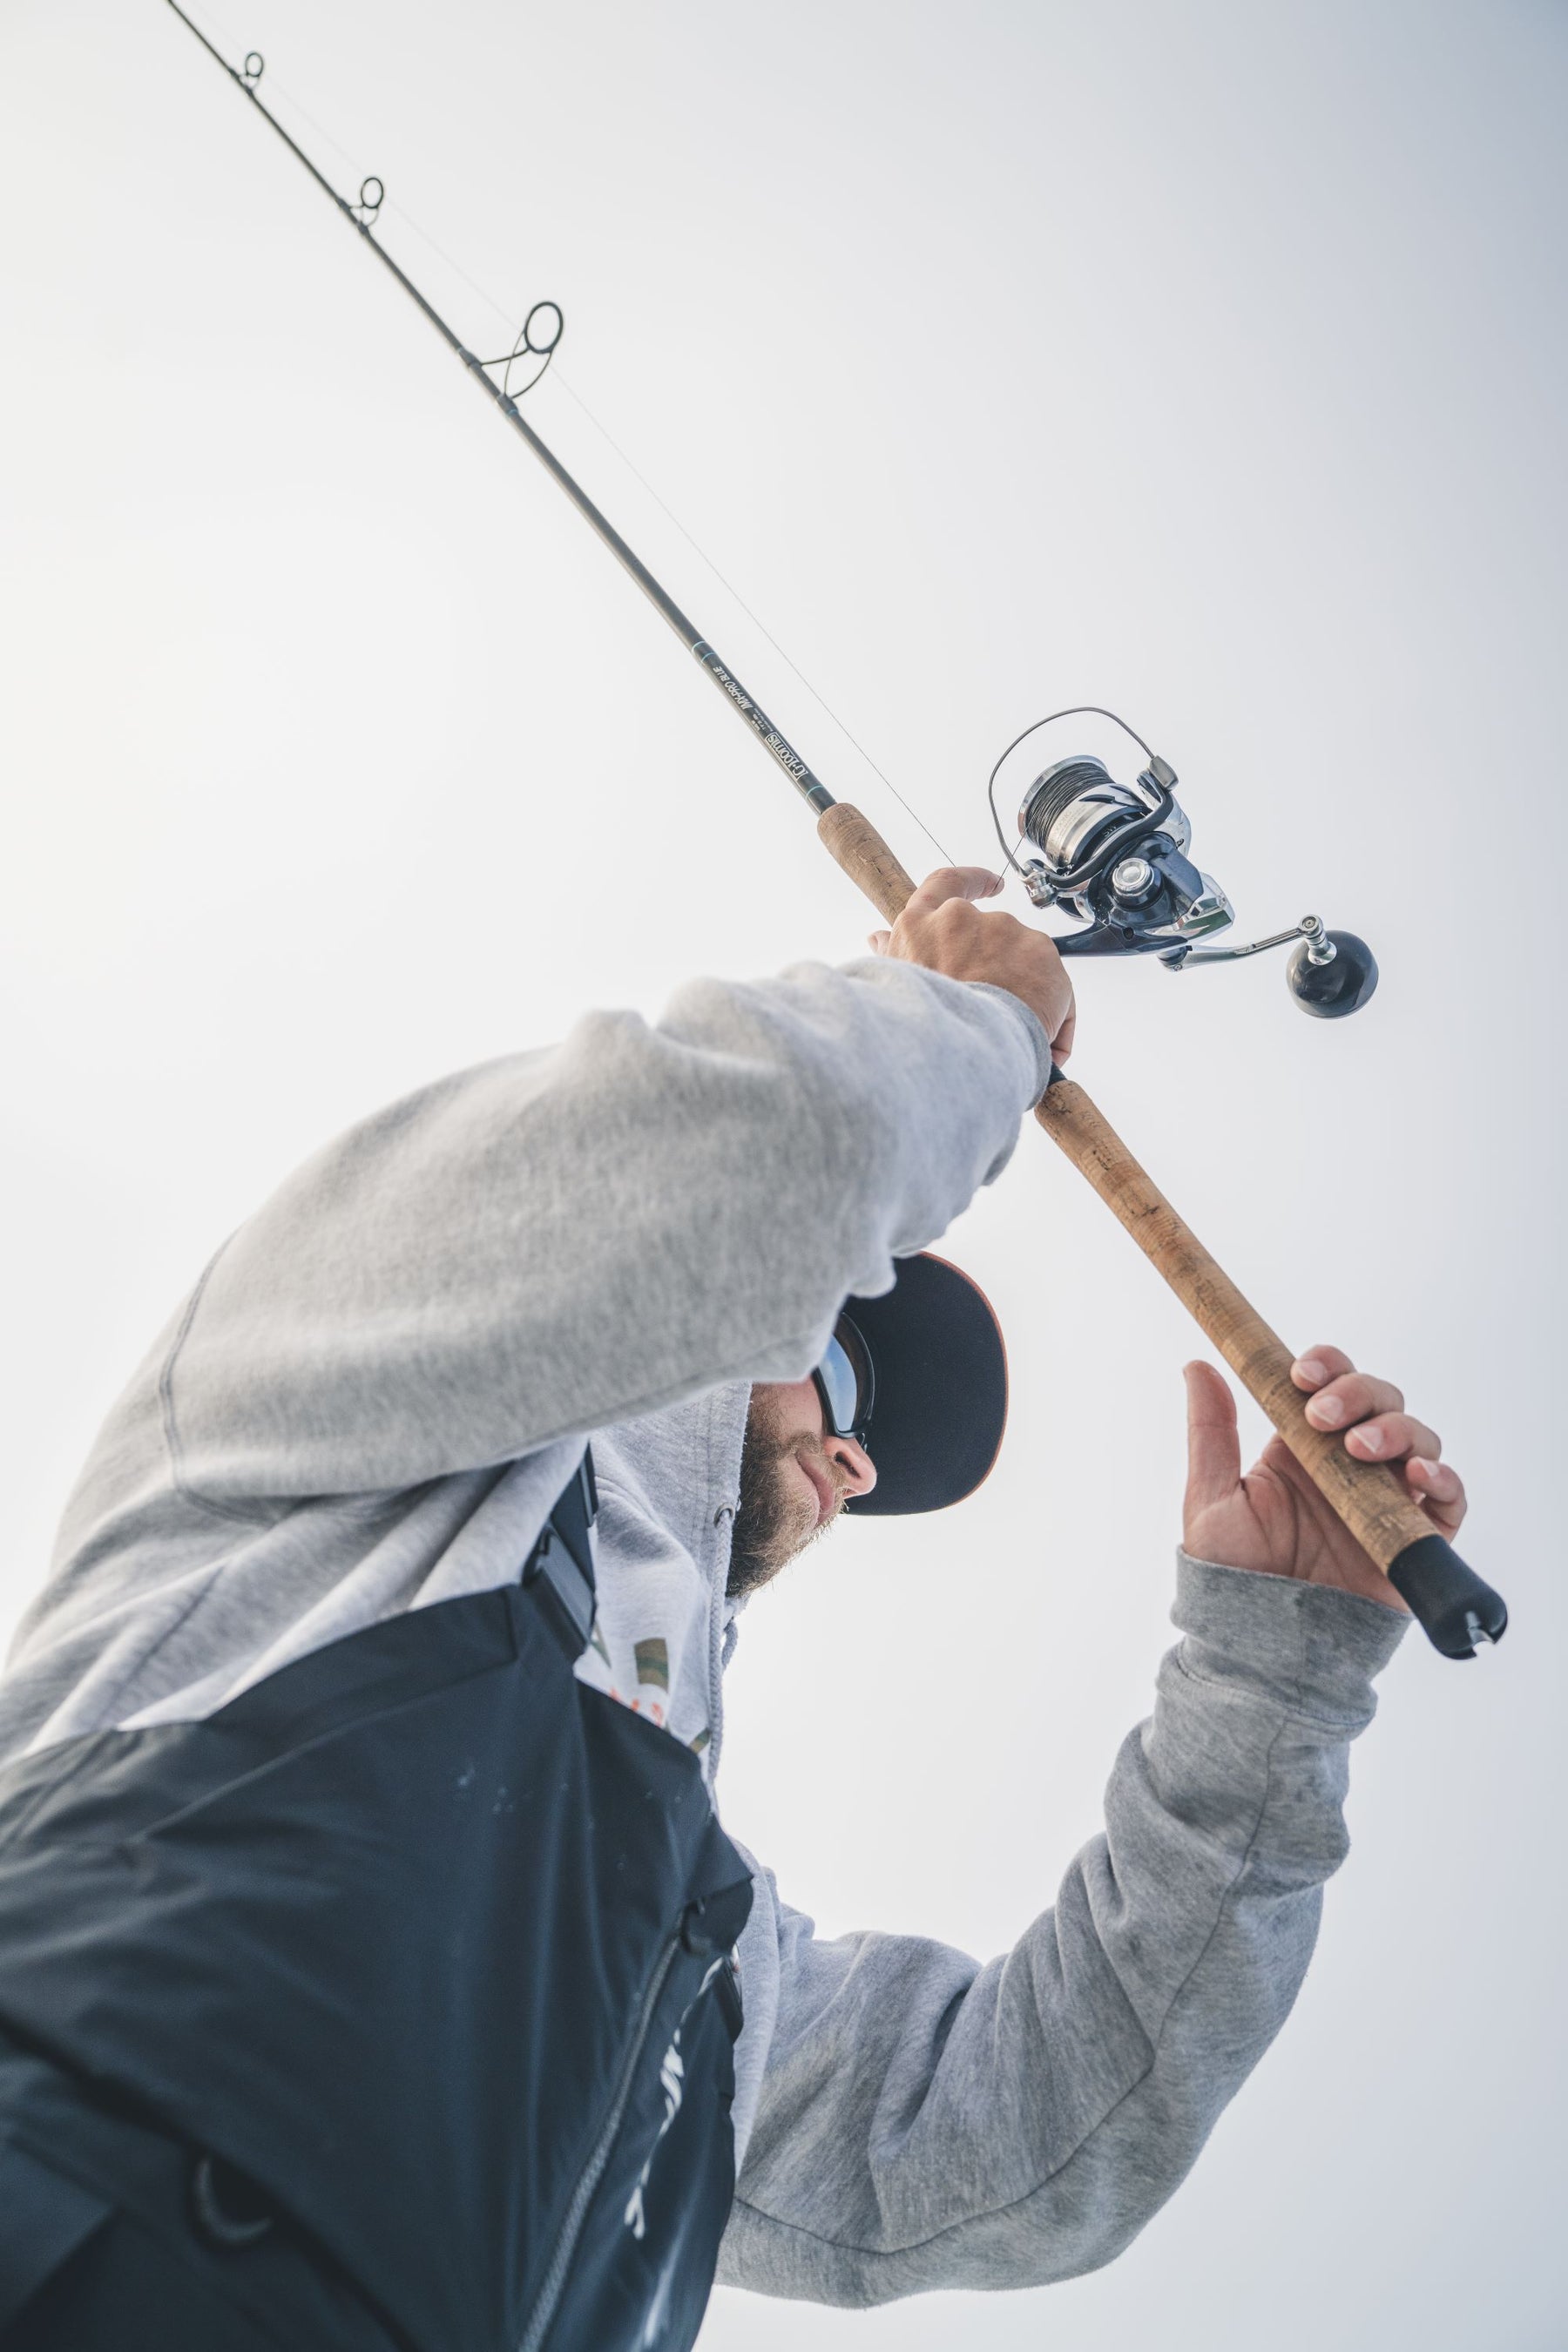 G.Loomis Canada  Handcrafted Conventional and Fly Fishing Rods